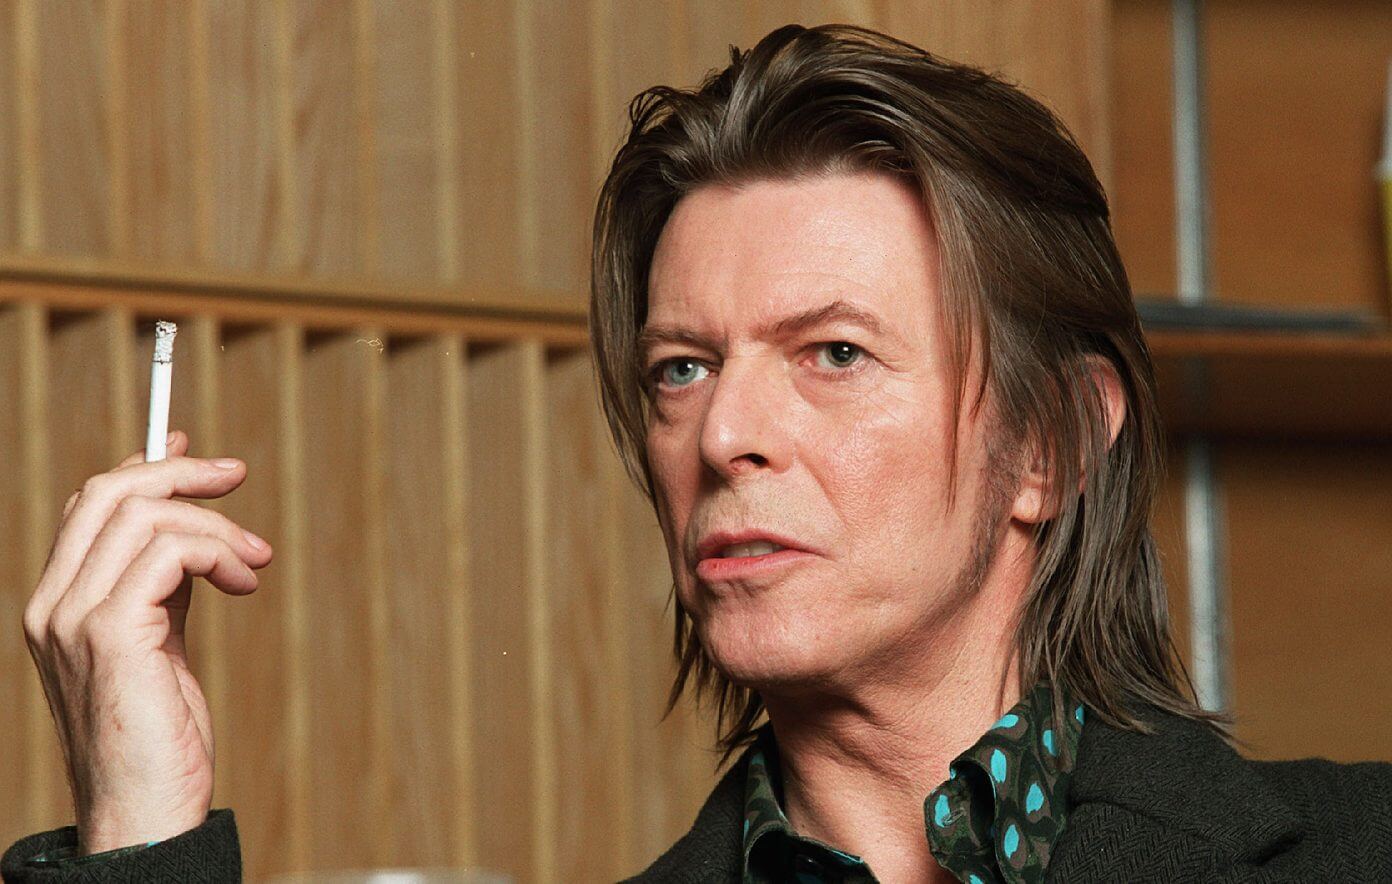 Listen To Two Previously Unreleased Versions Of David Bowie Tracks 6981